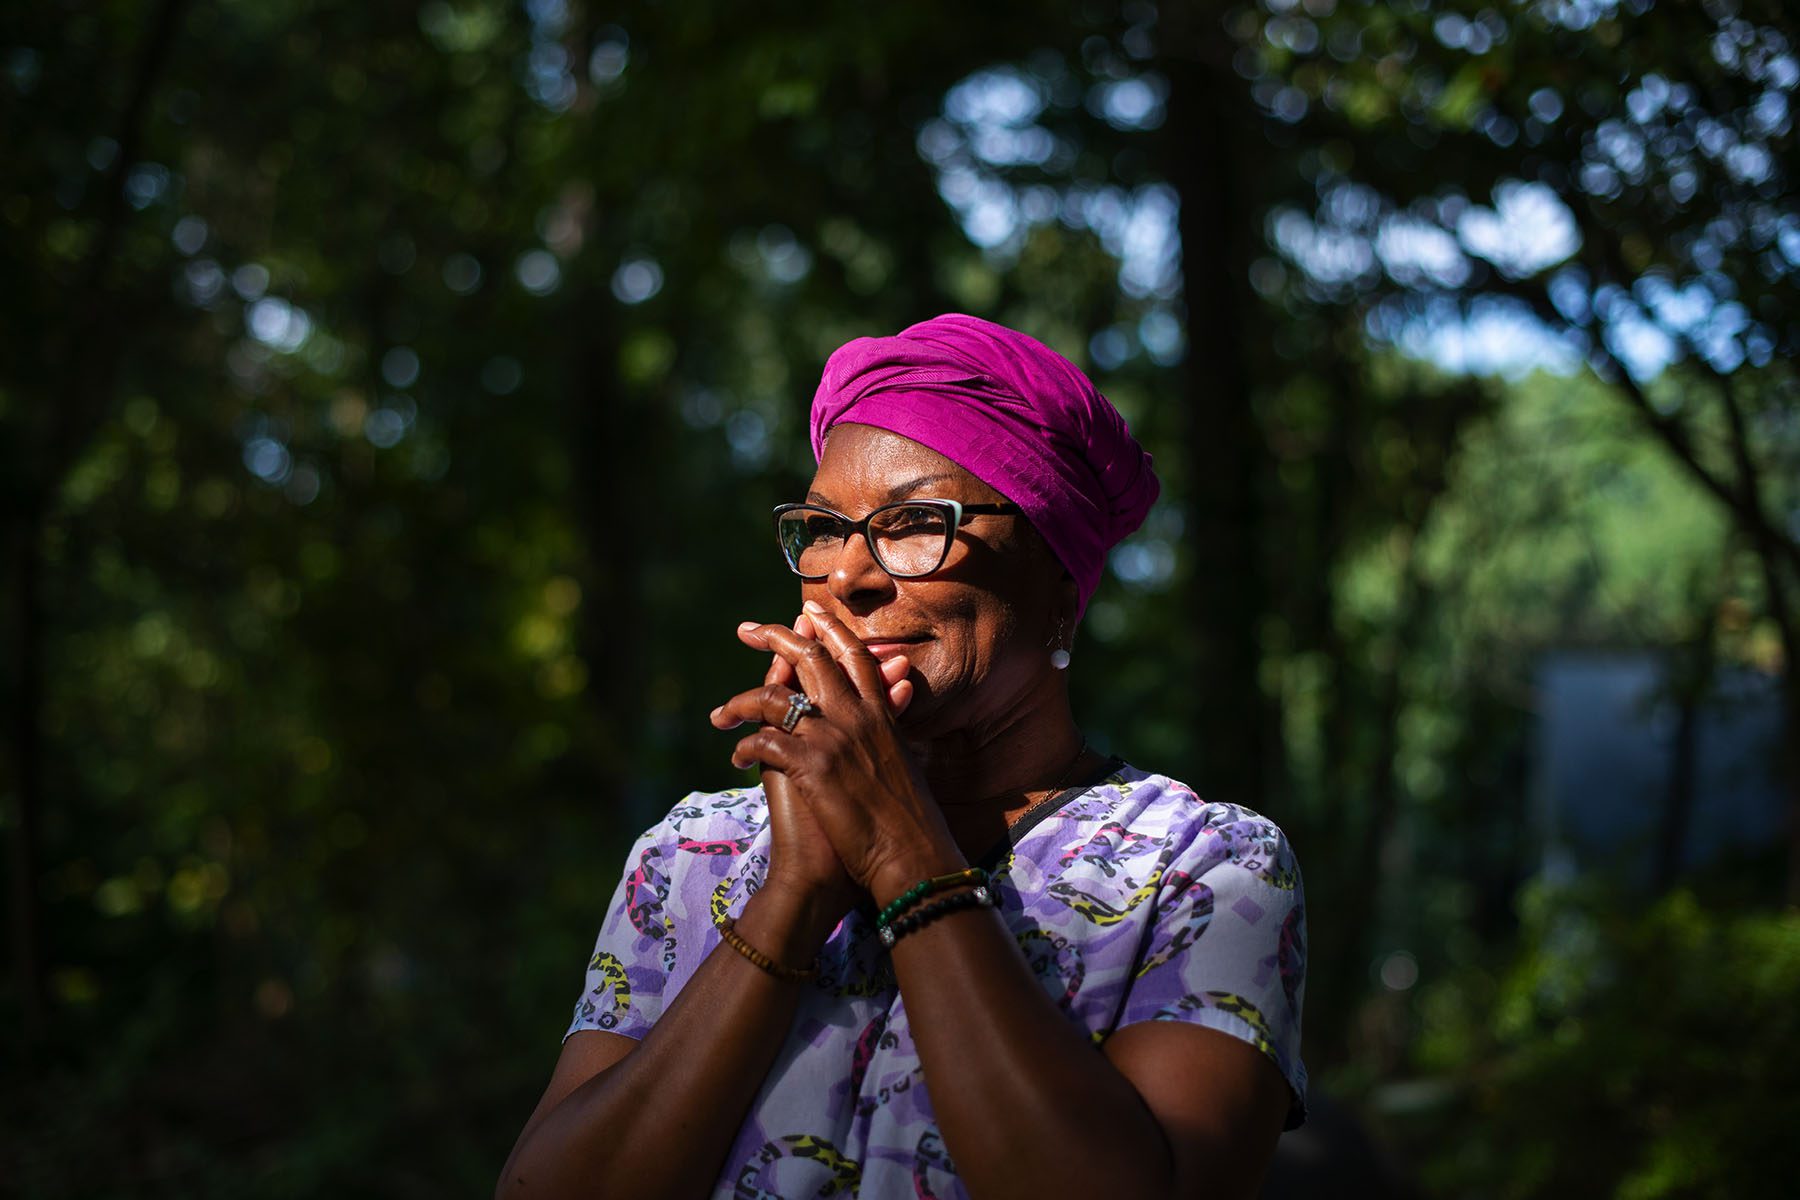 A woman wearing a pink turban and purple scrubs's face is lit by a ray of sun. She is surrounded by trees.